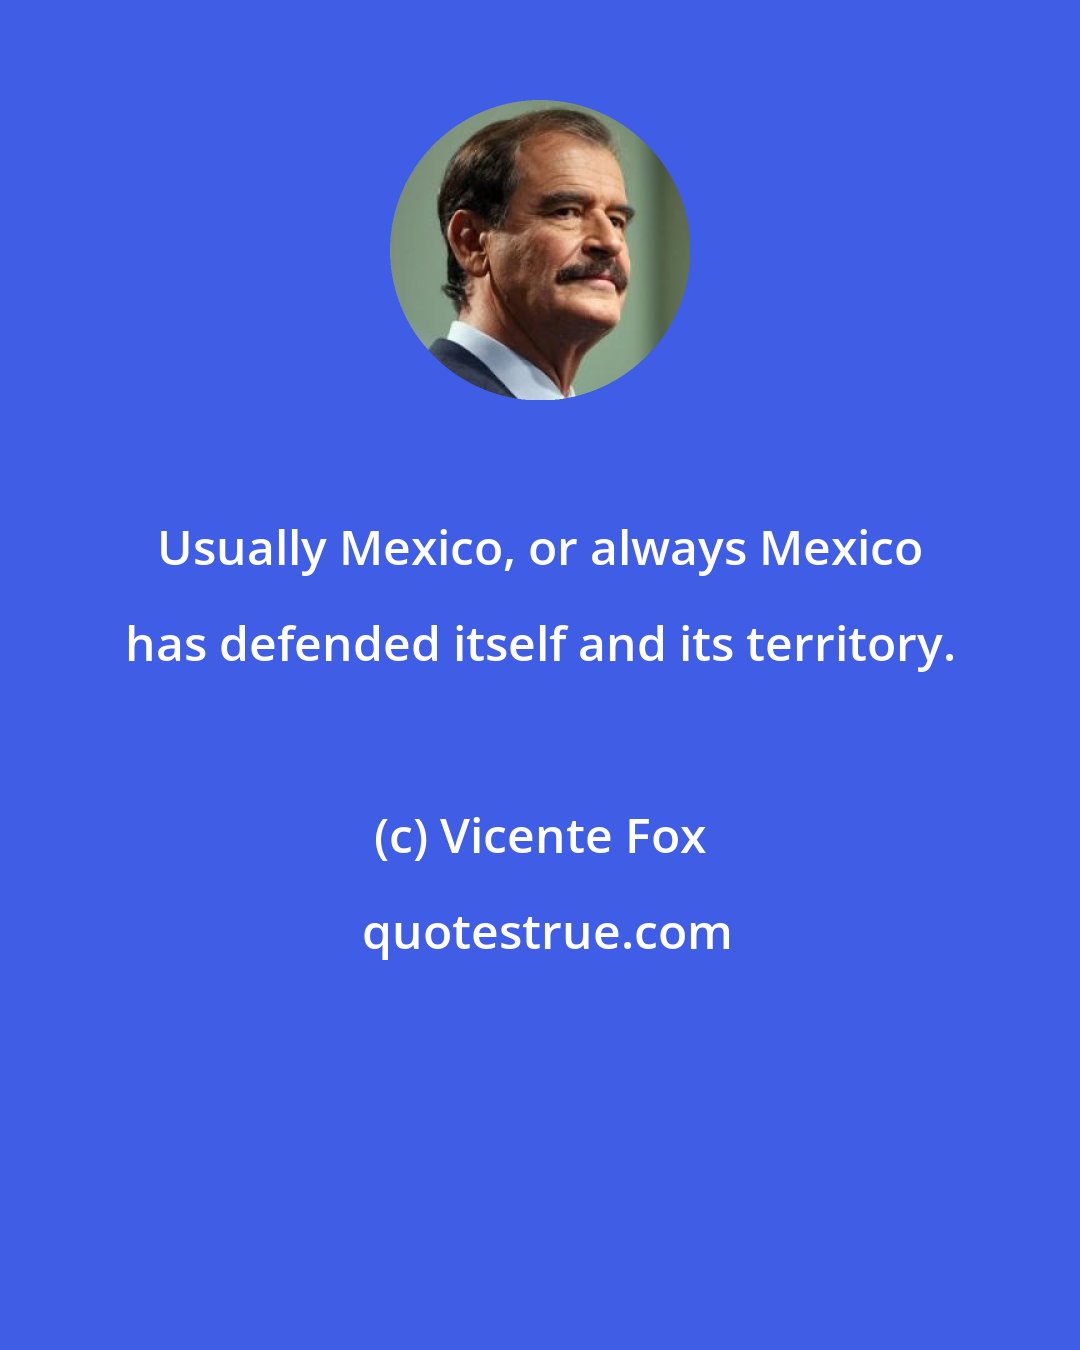 Vicente Fox: Usually Mexico, or always Mexico has defended itself and its territory.